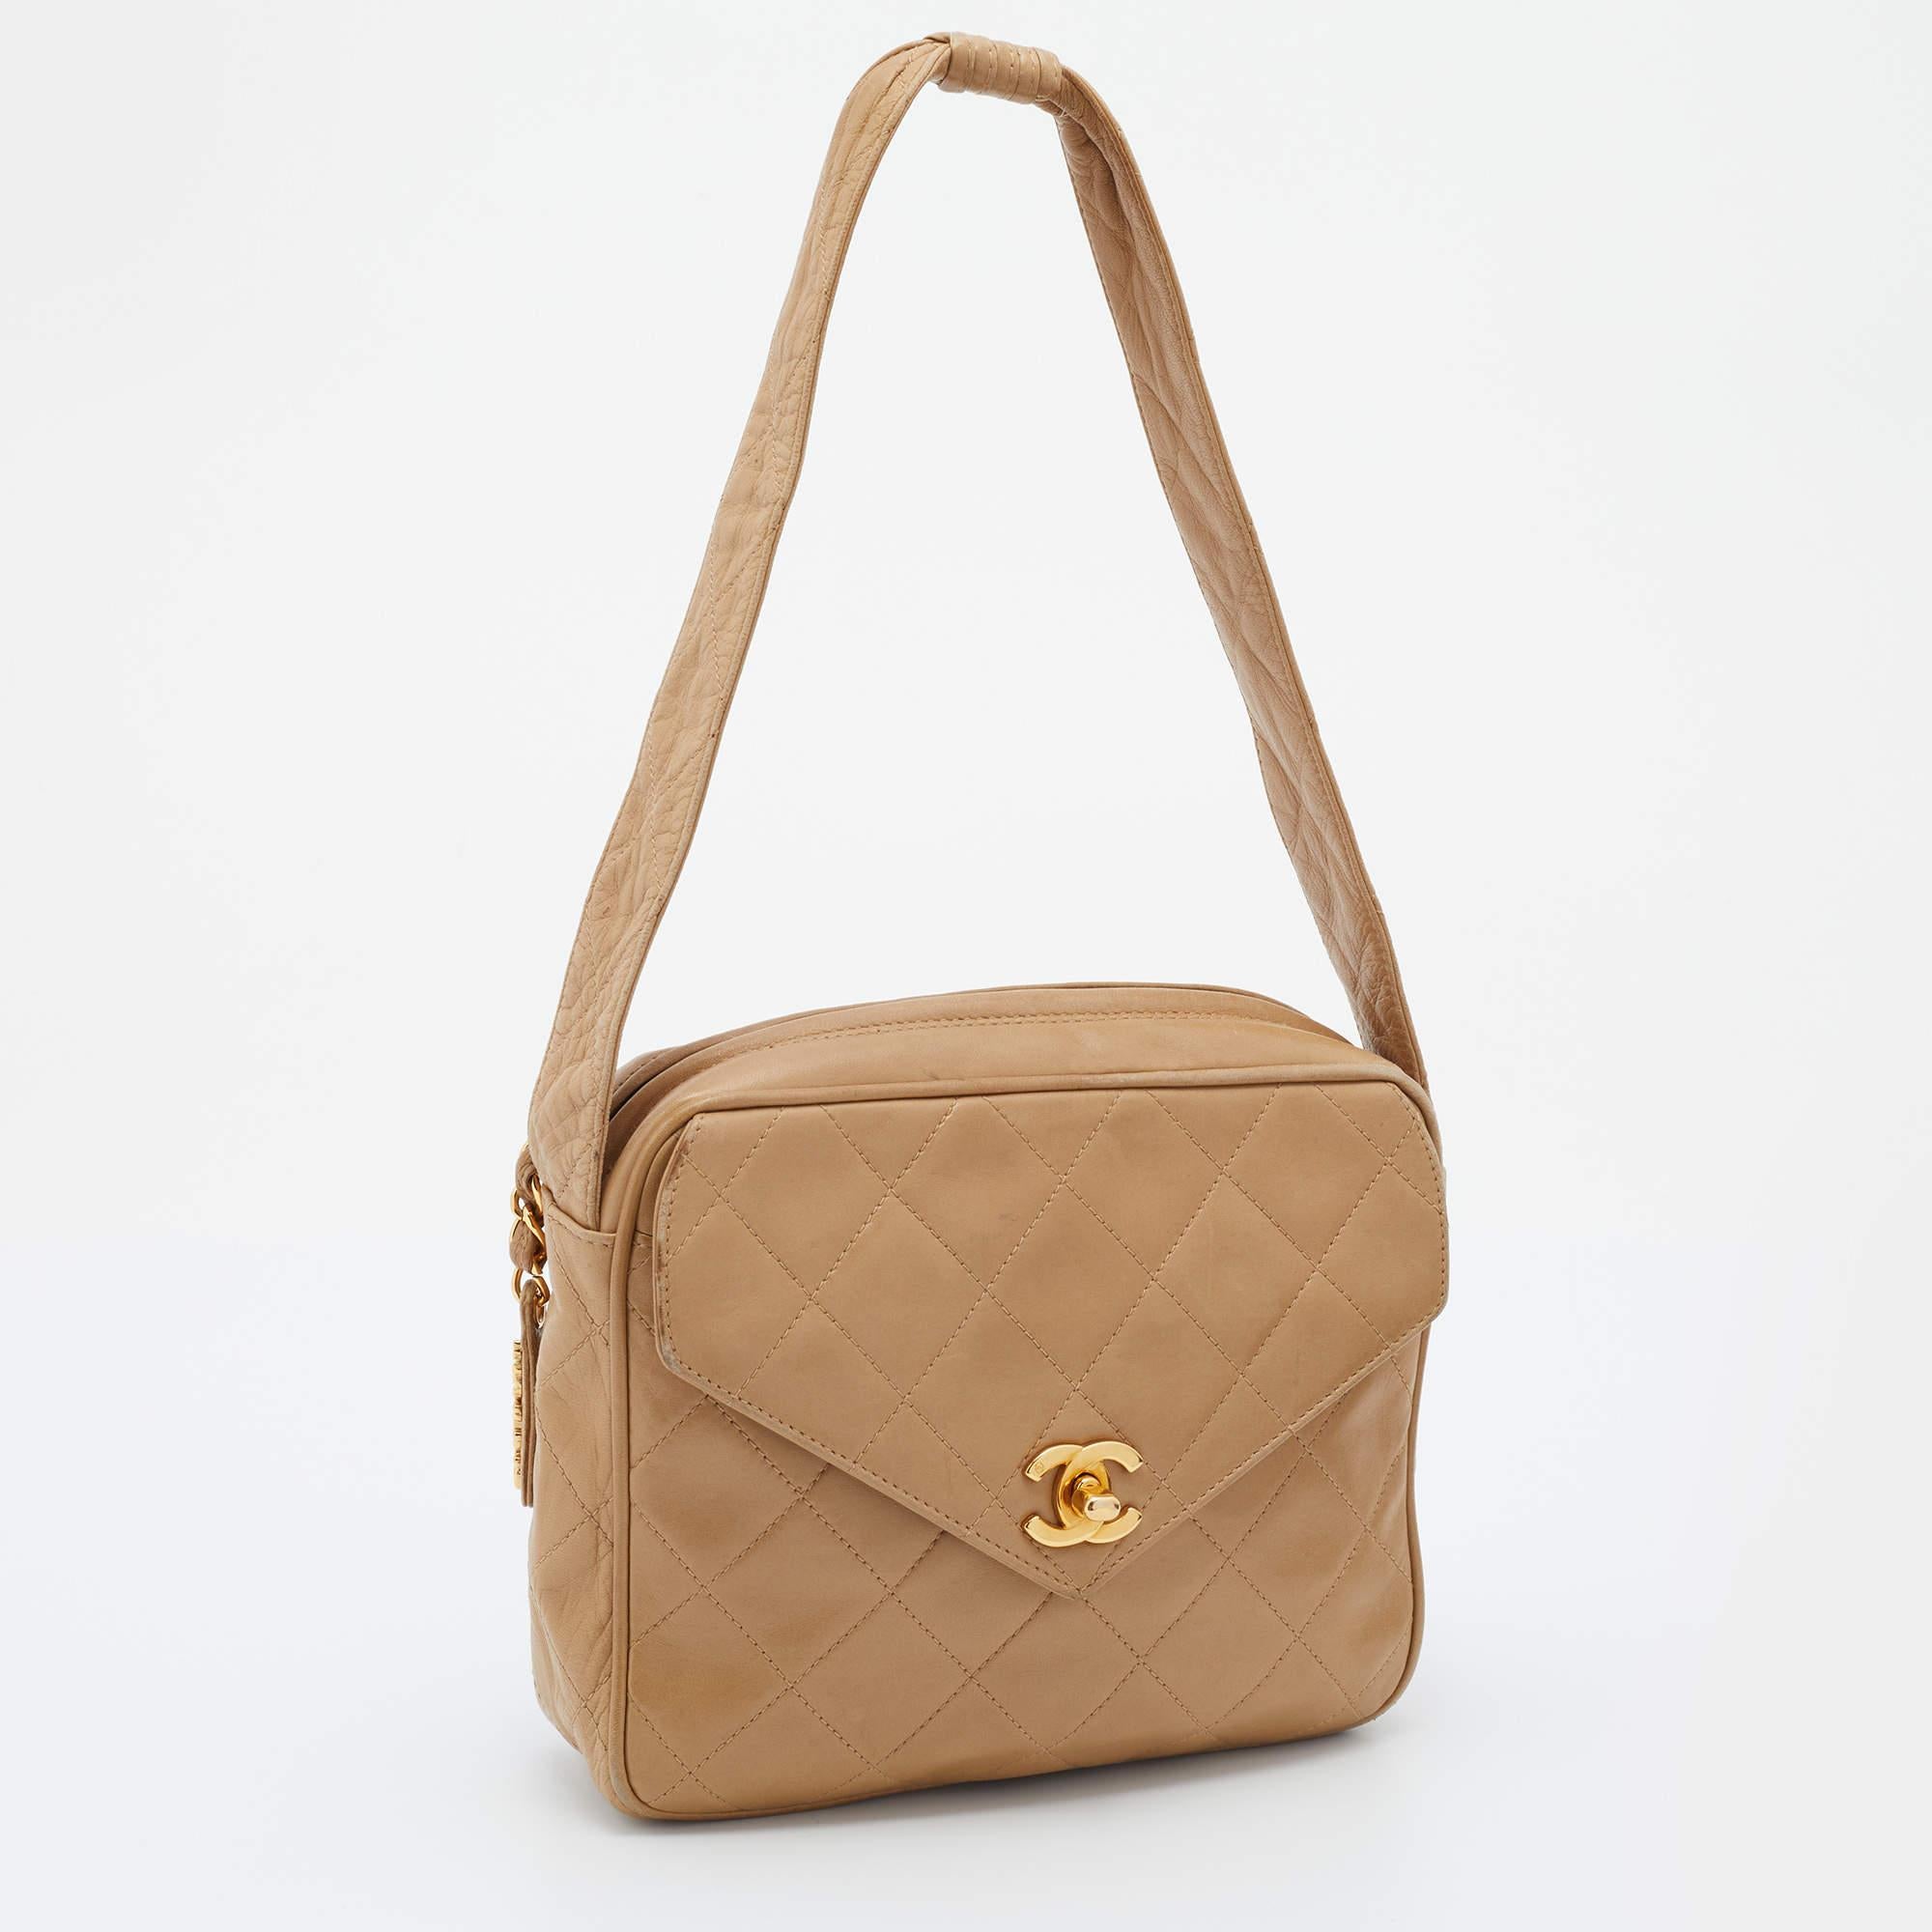 Women's Chanel Beige Quilted Leather Vintage Camera Bag